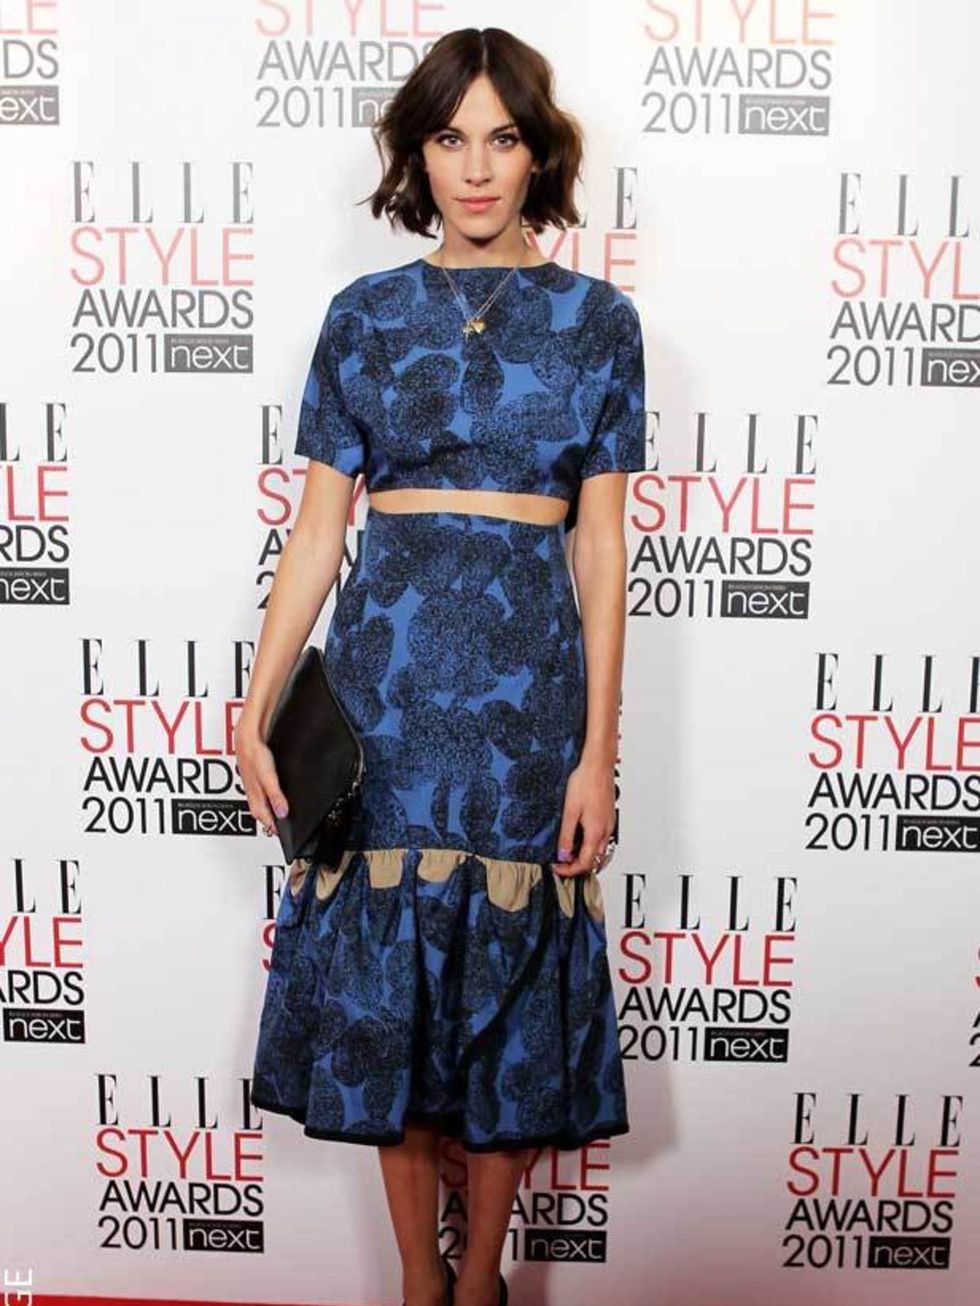 <p><a href="http://www.elleuk.com/starstyle/style-files/%28section%29/Alexa-Chung">Alexa Chung</a> wearing an <a href="http://www.elleuk.com/catwalk/collections/yves-saint-laurent/spring-summer-2011/review">Yves Saint Laurent</a> dress at the <a href="htt